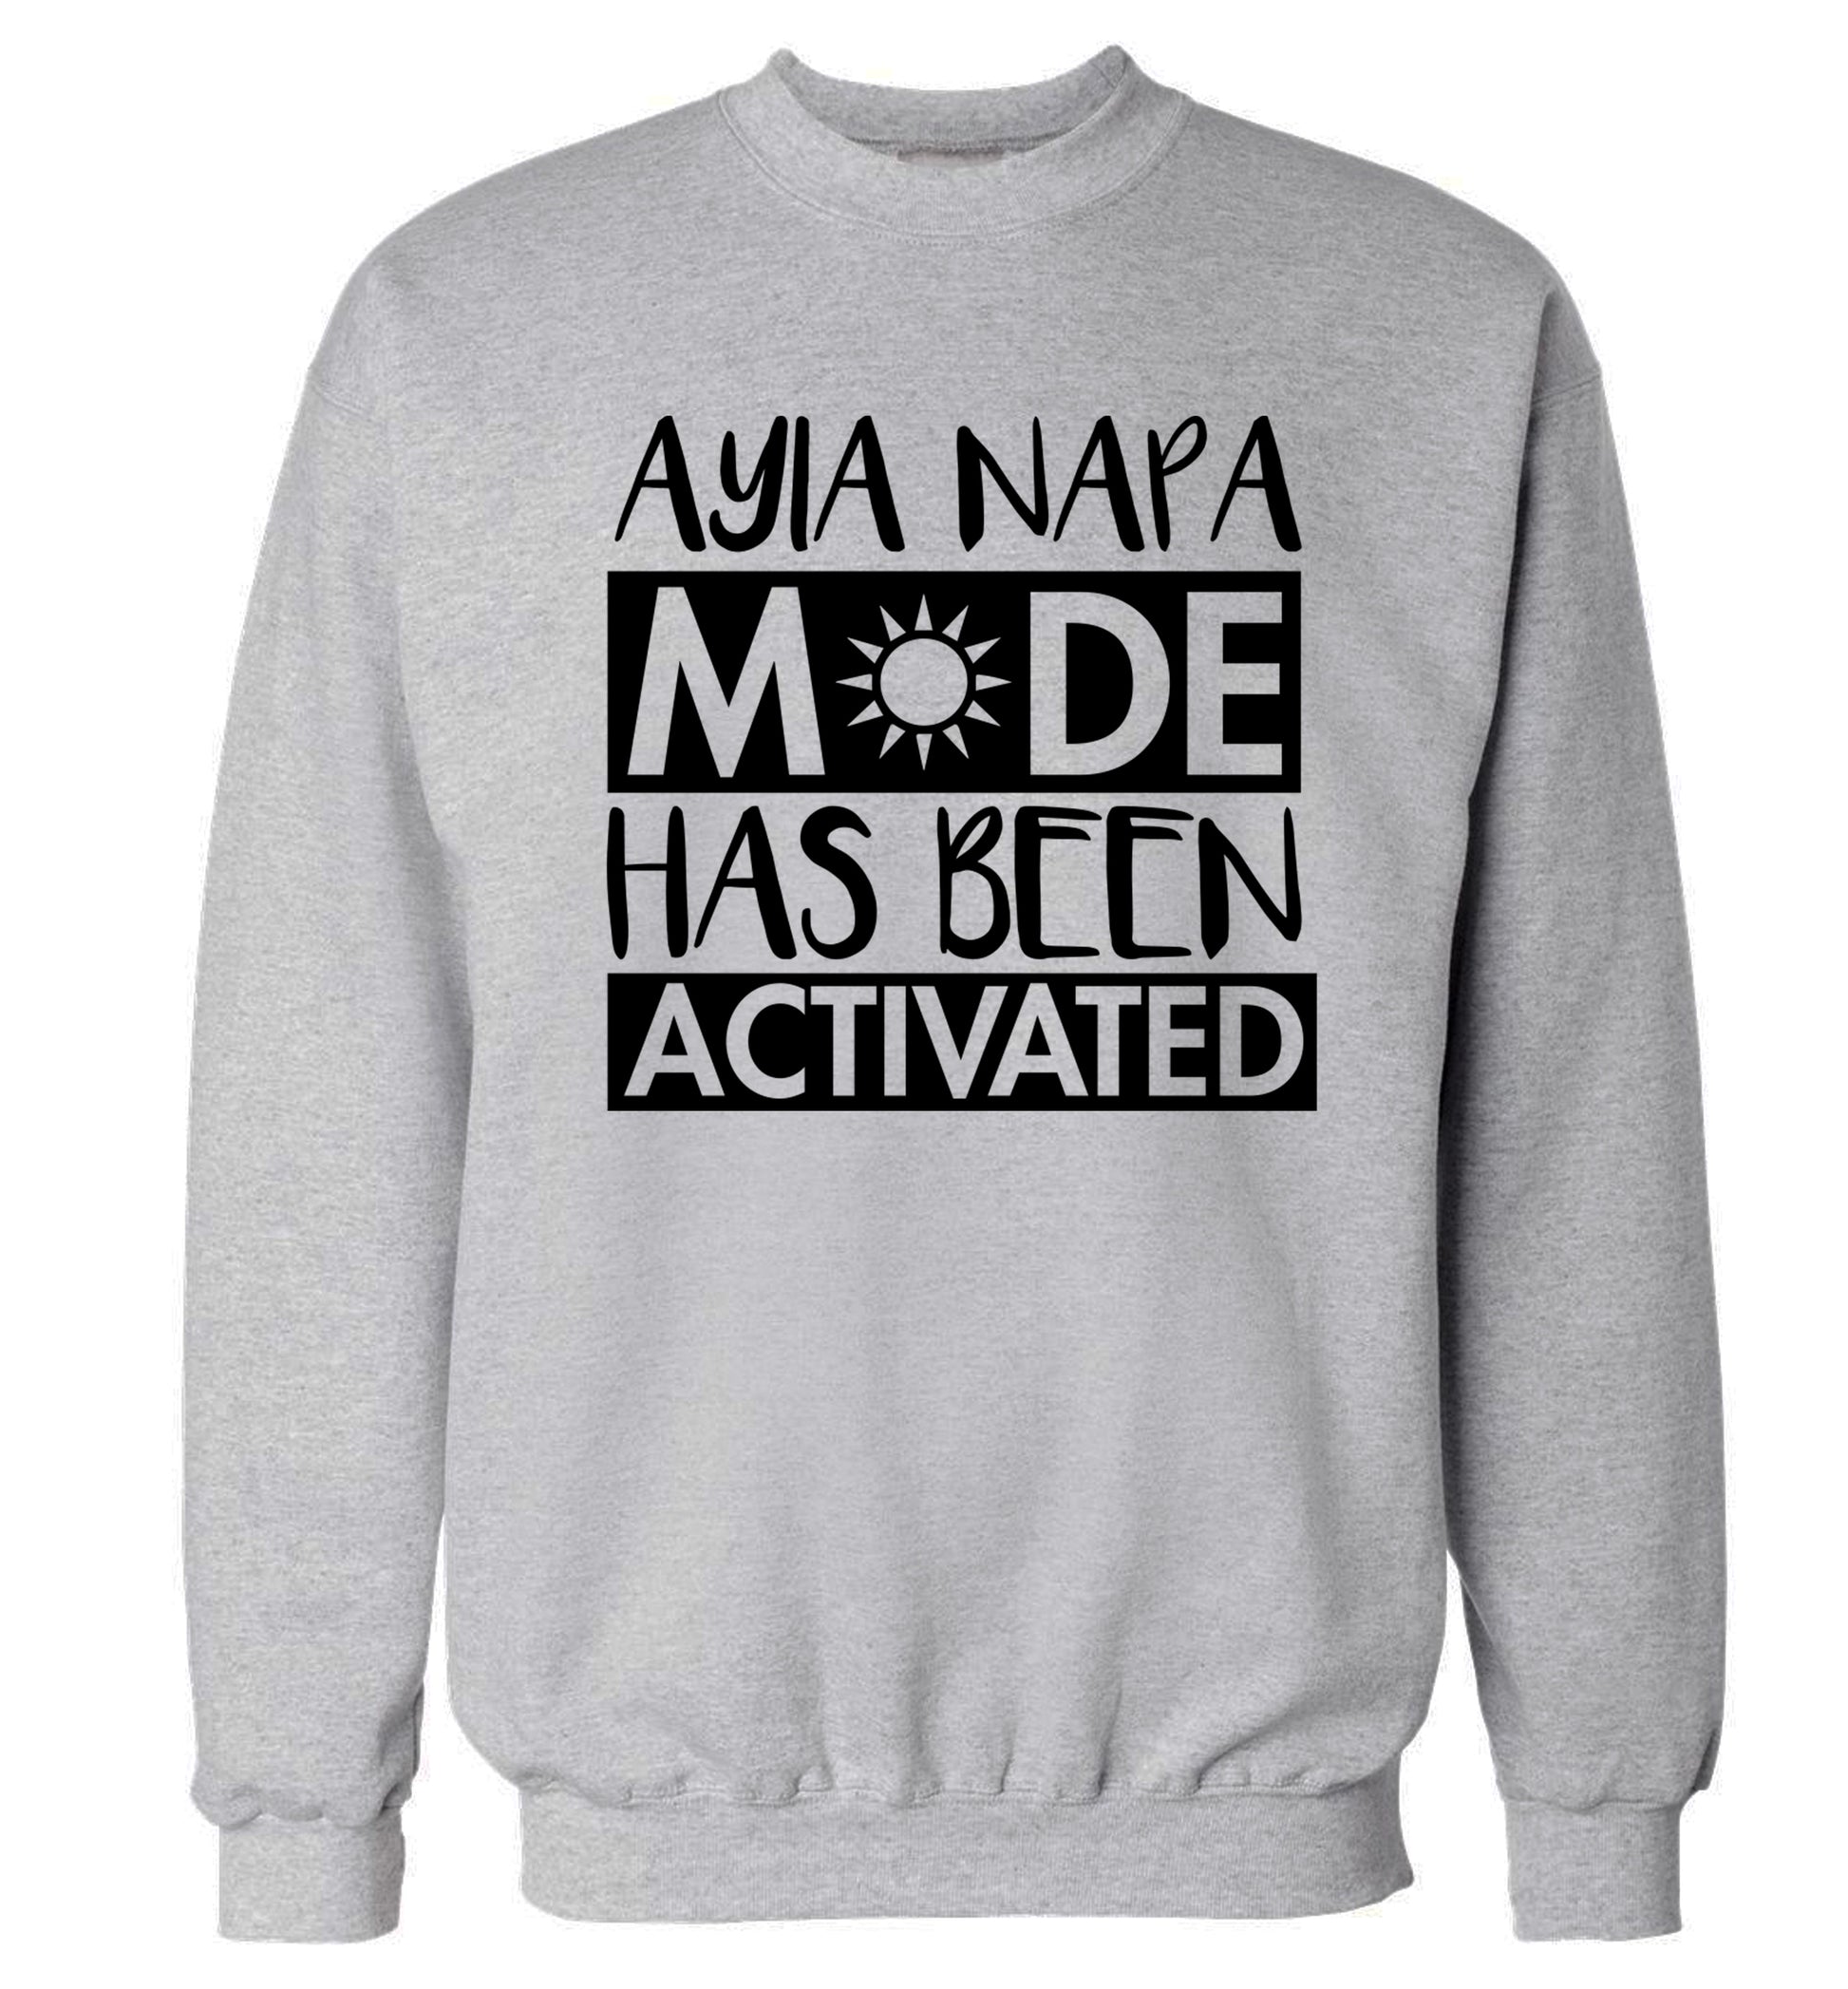 Ayia Napa mode has been activated Adult's unisex grey Sweater 2XL